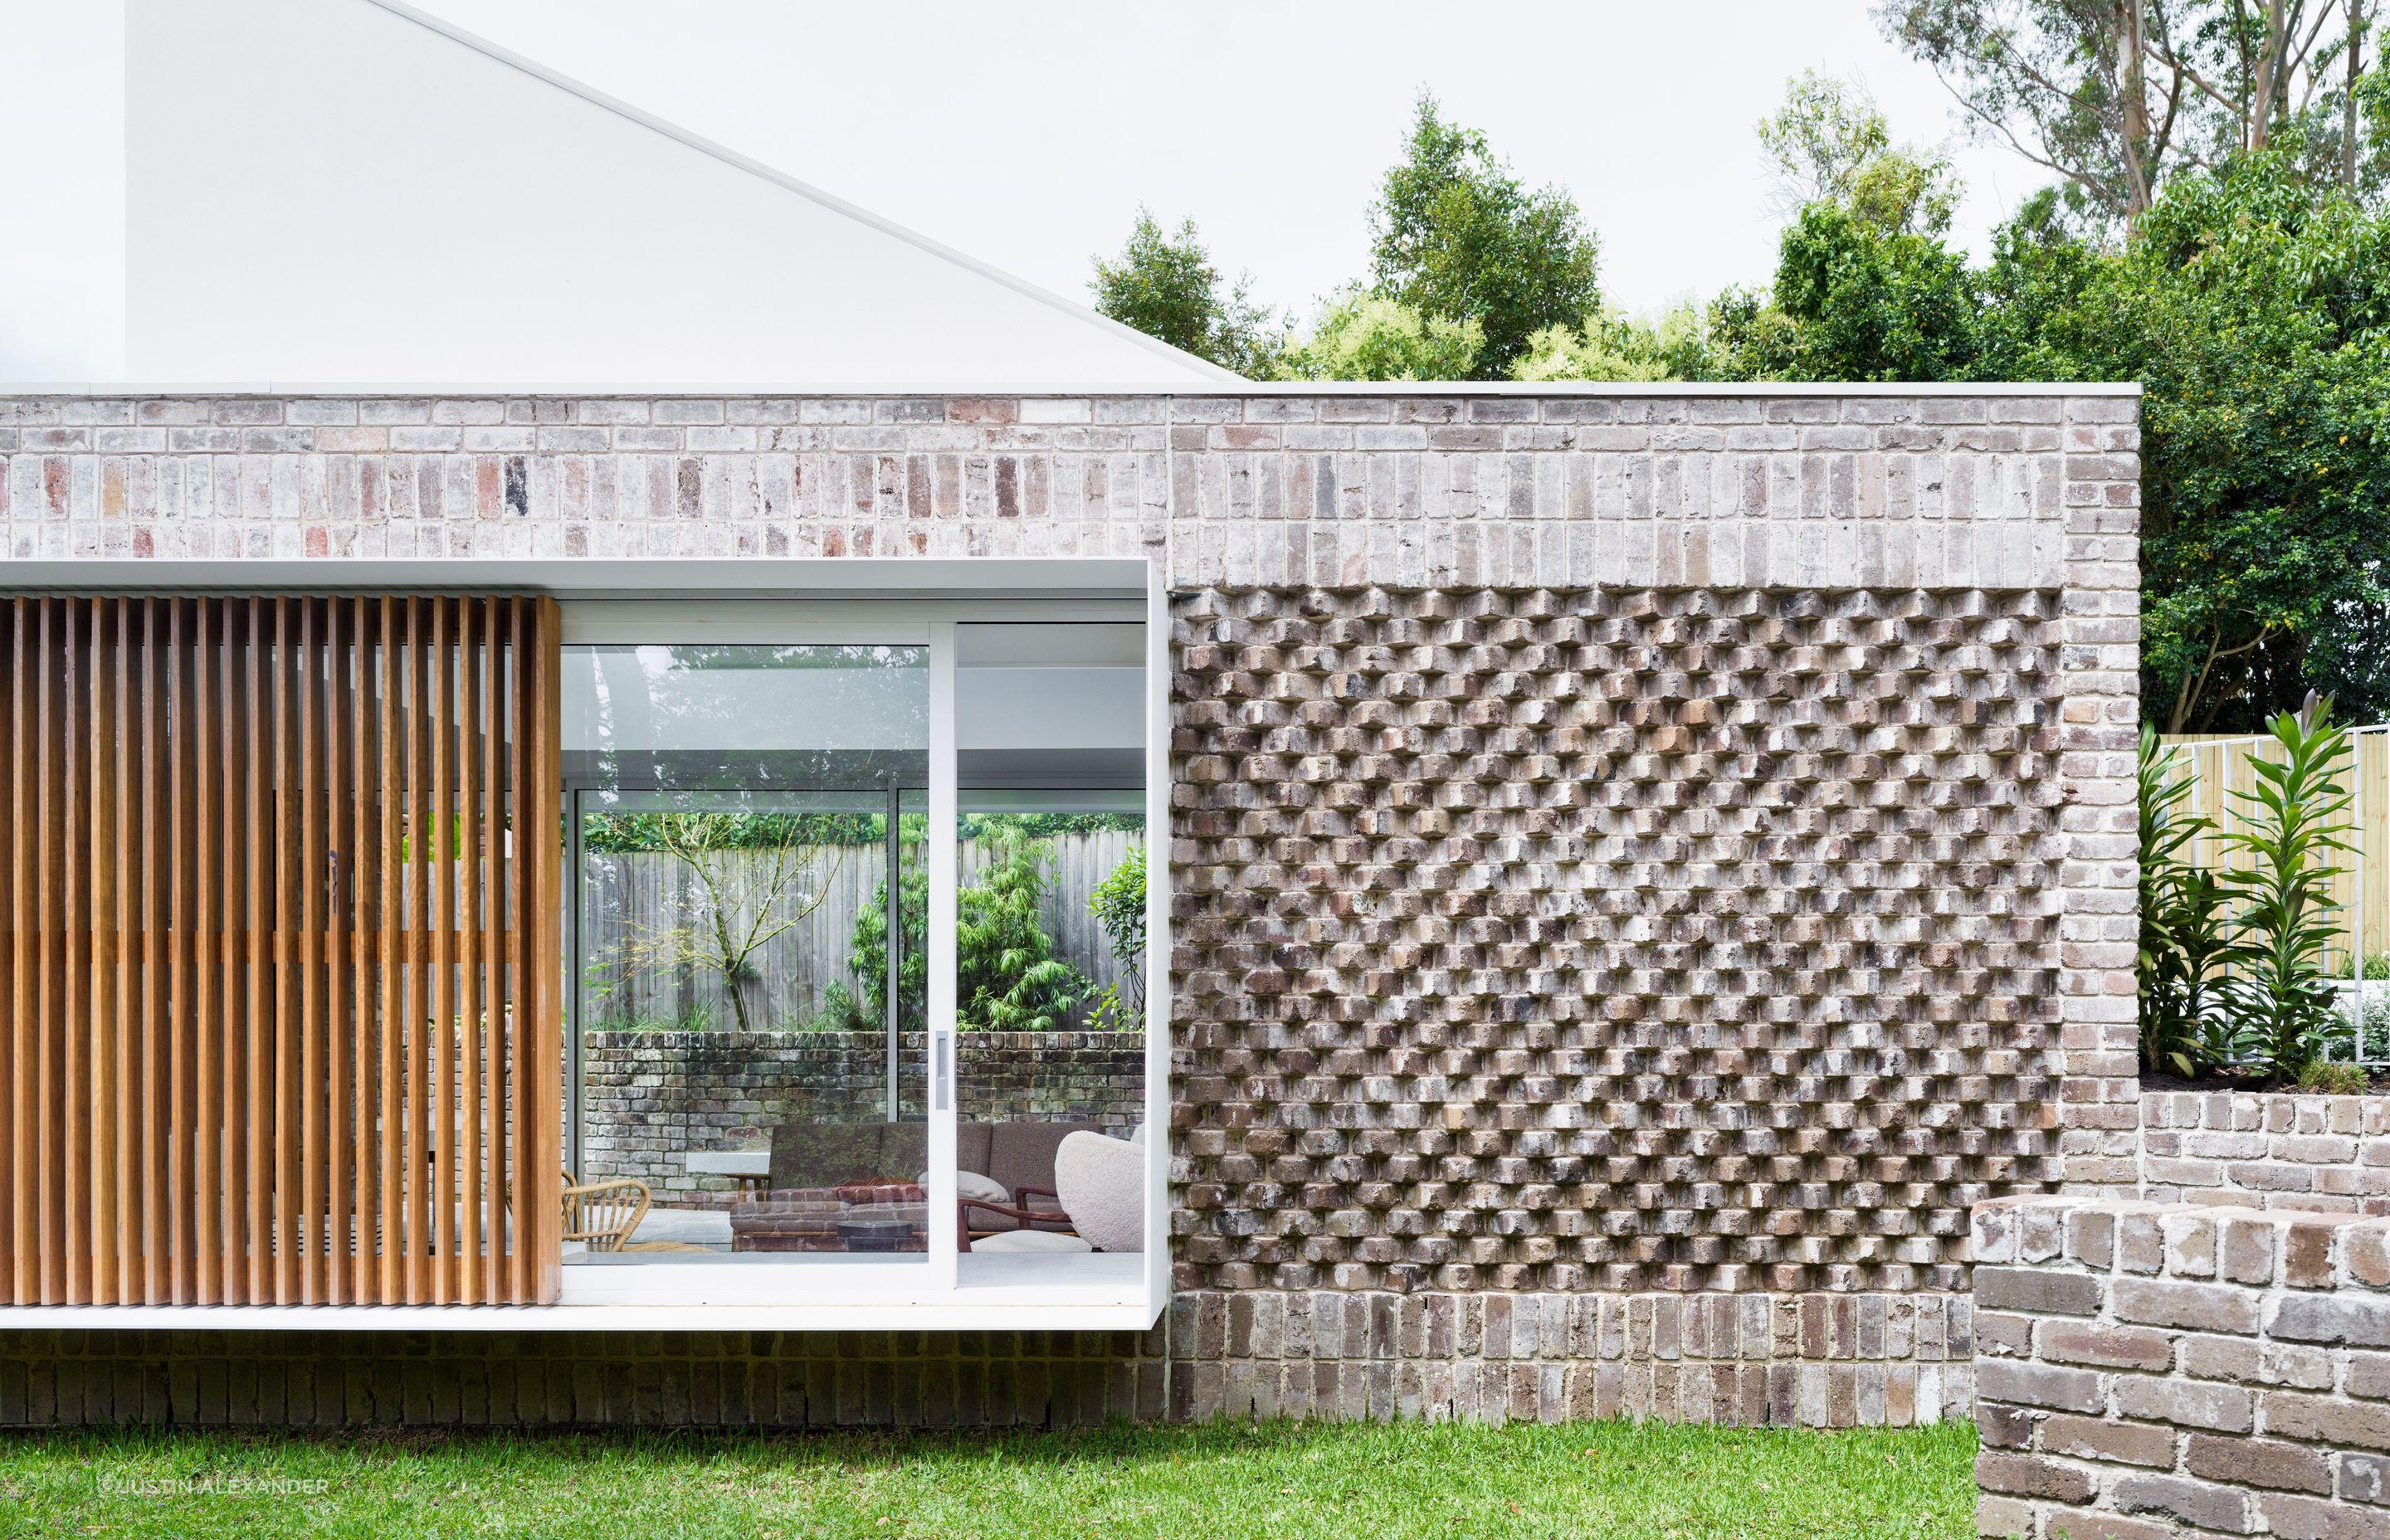 Recycled bricks laid in various bonds add interest to the exterior.